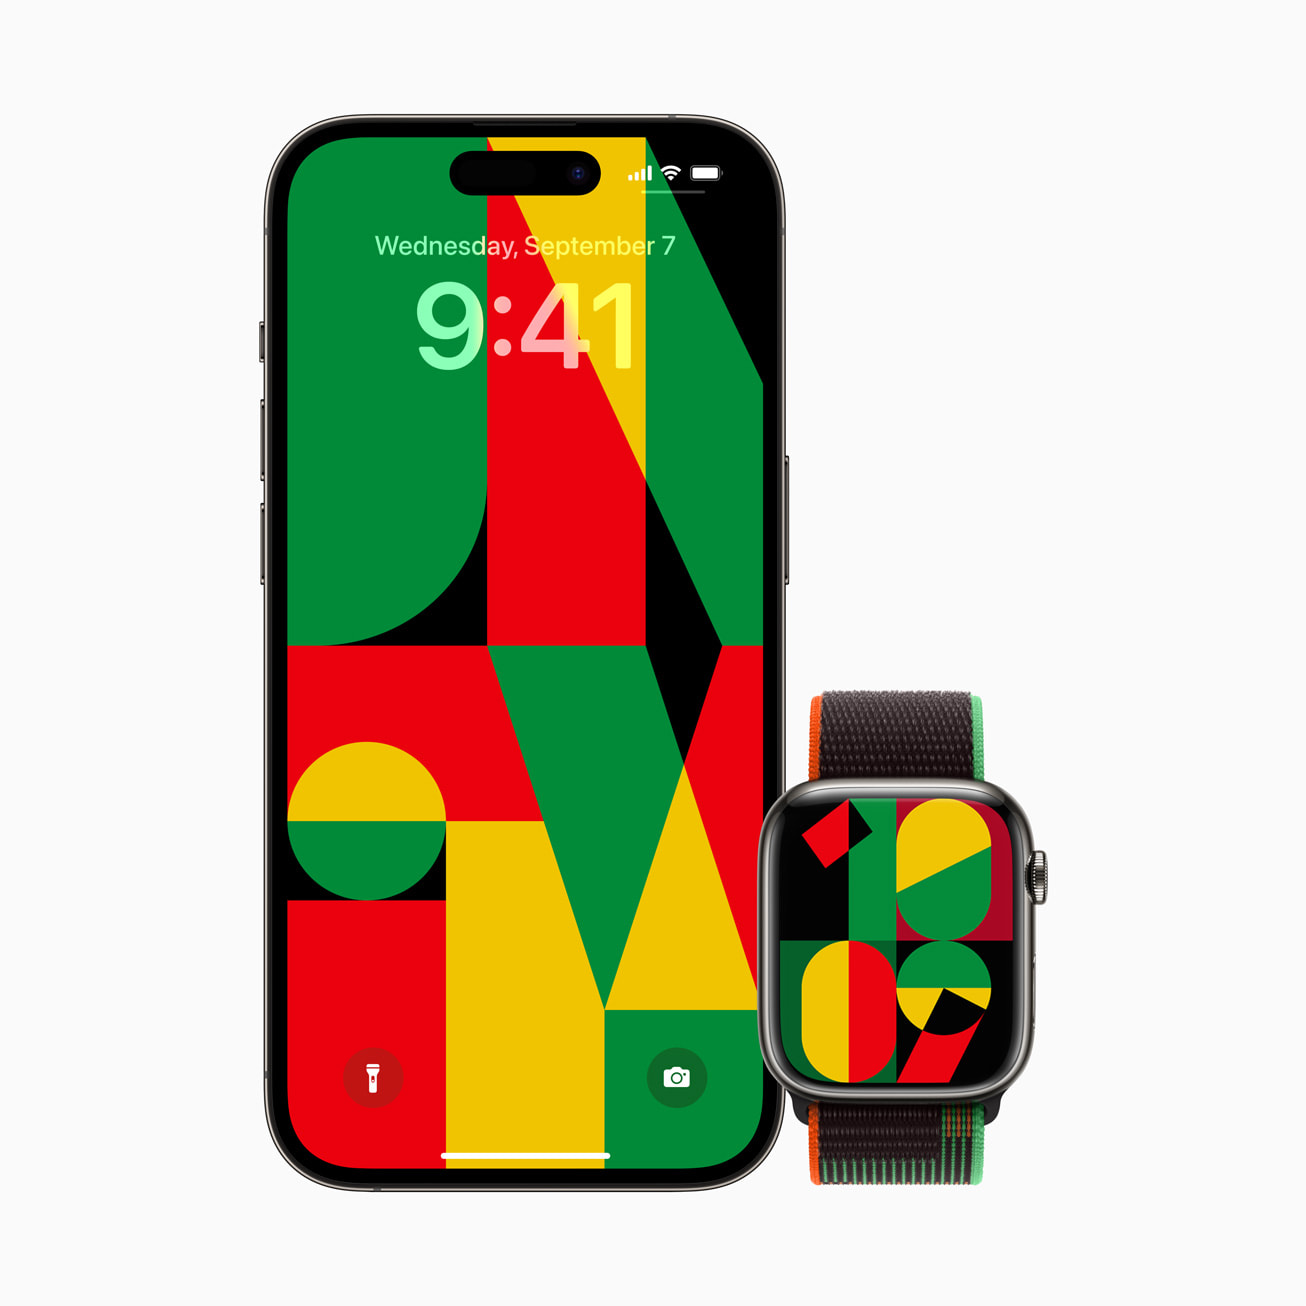 Apple celebrates Black History Month with special-edition Apple Watch Sport Loop, new watch face, more